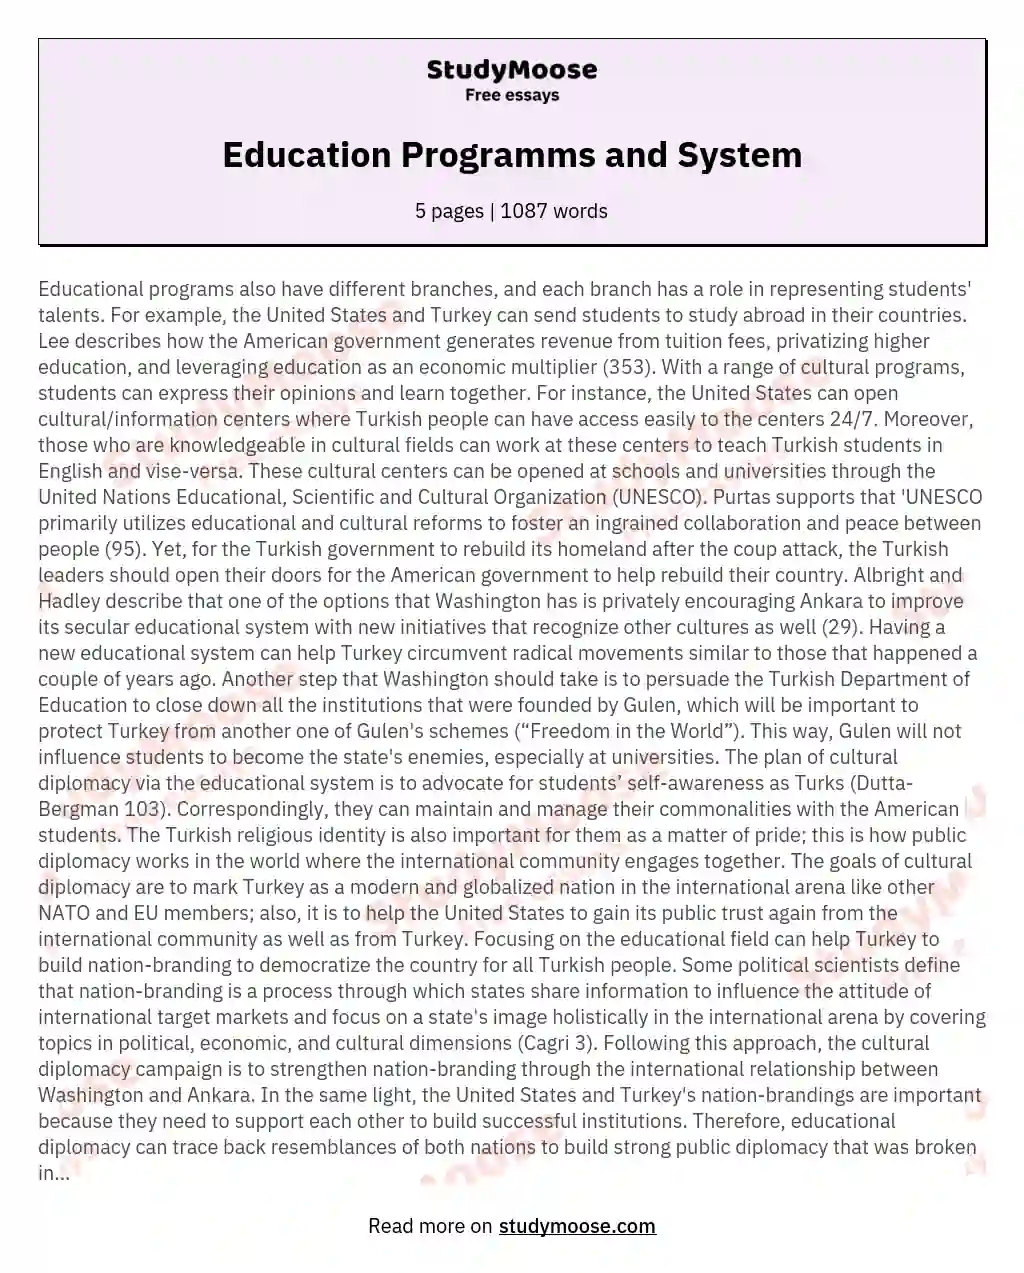 Education Programms and System essay